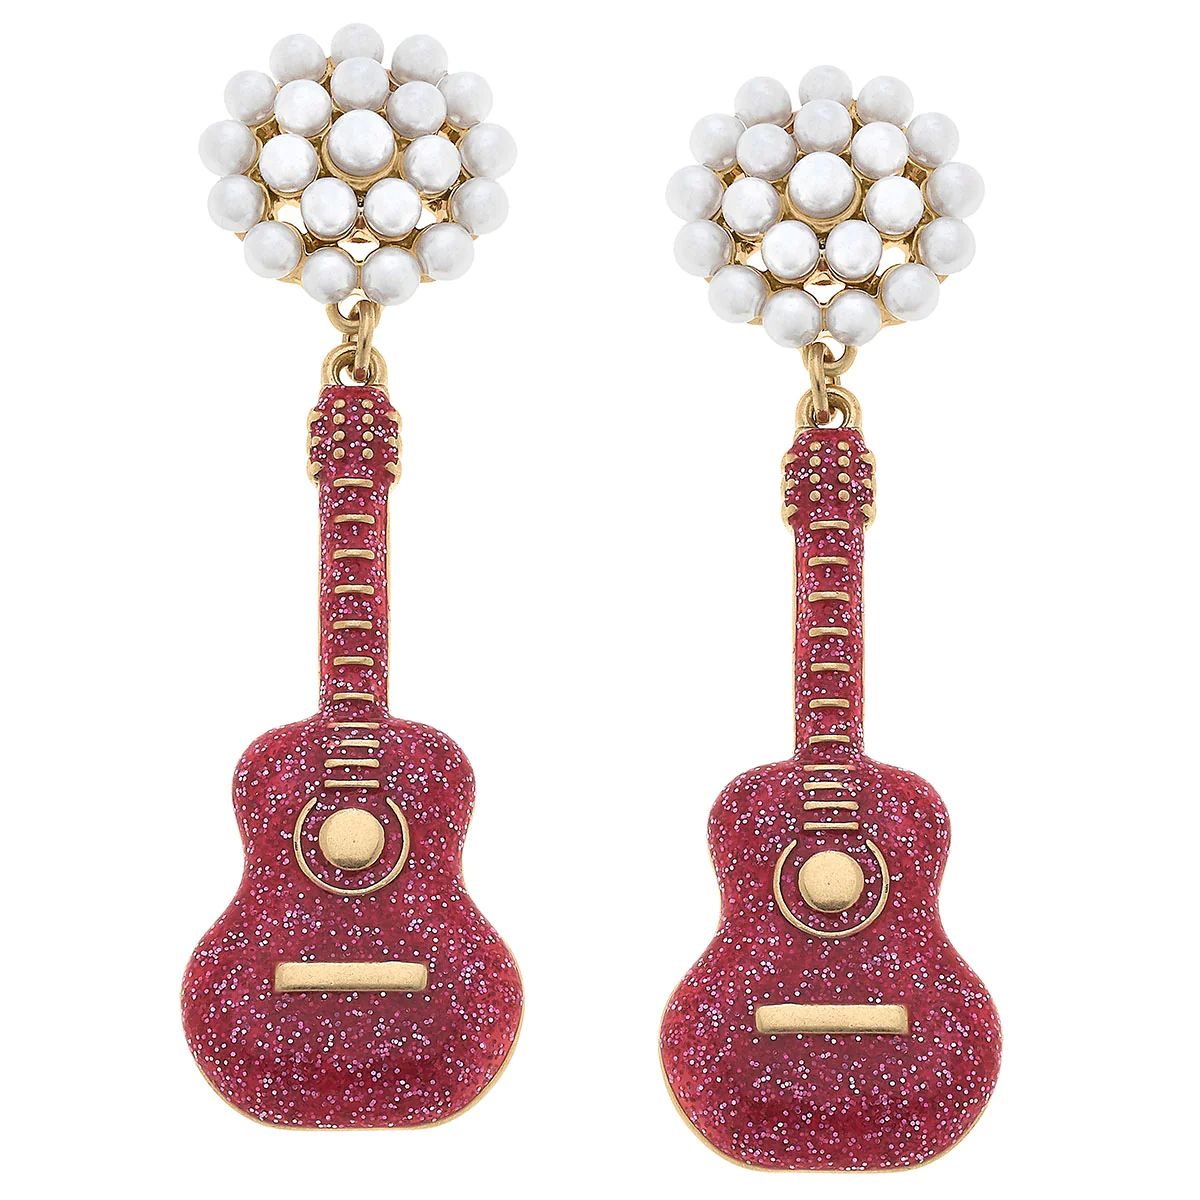 CANVAS Style x AP Style Guitar Earrings in Pink | CANVAS